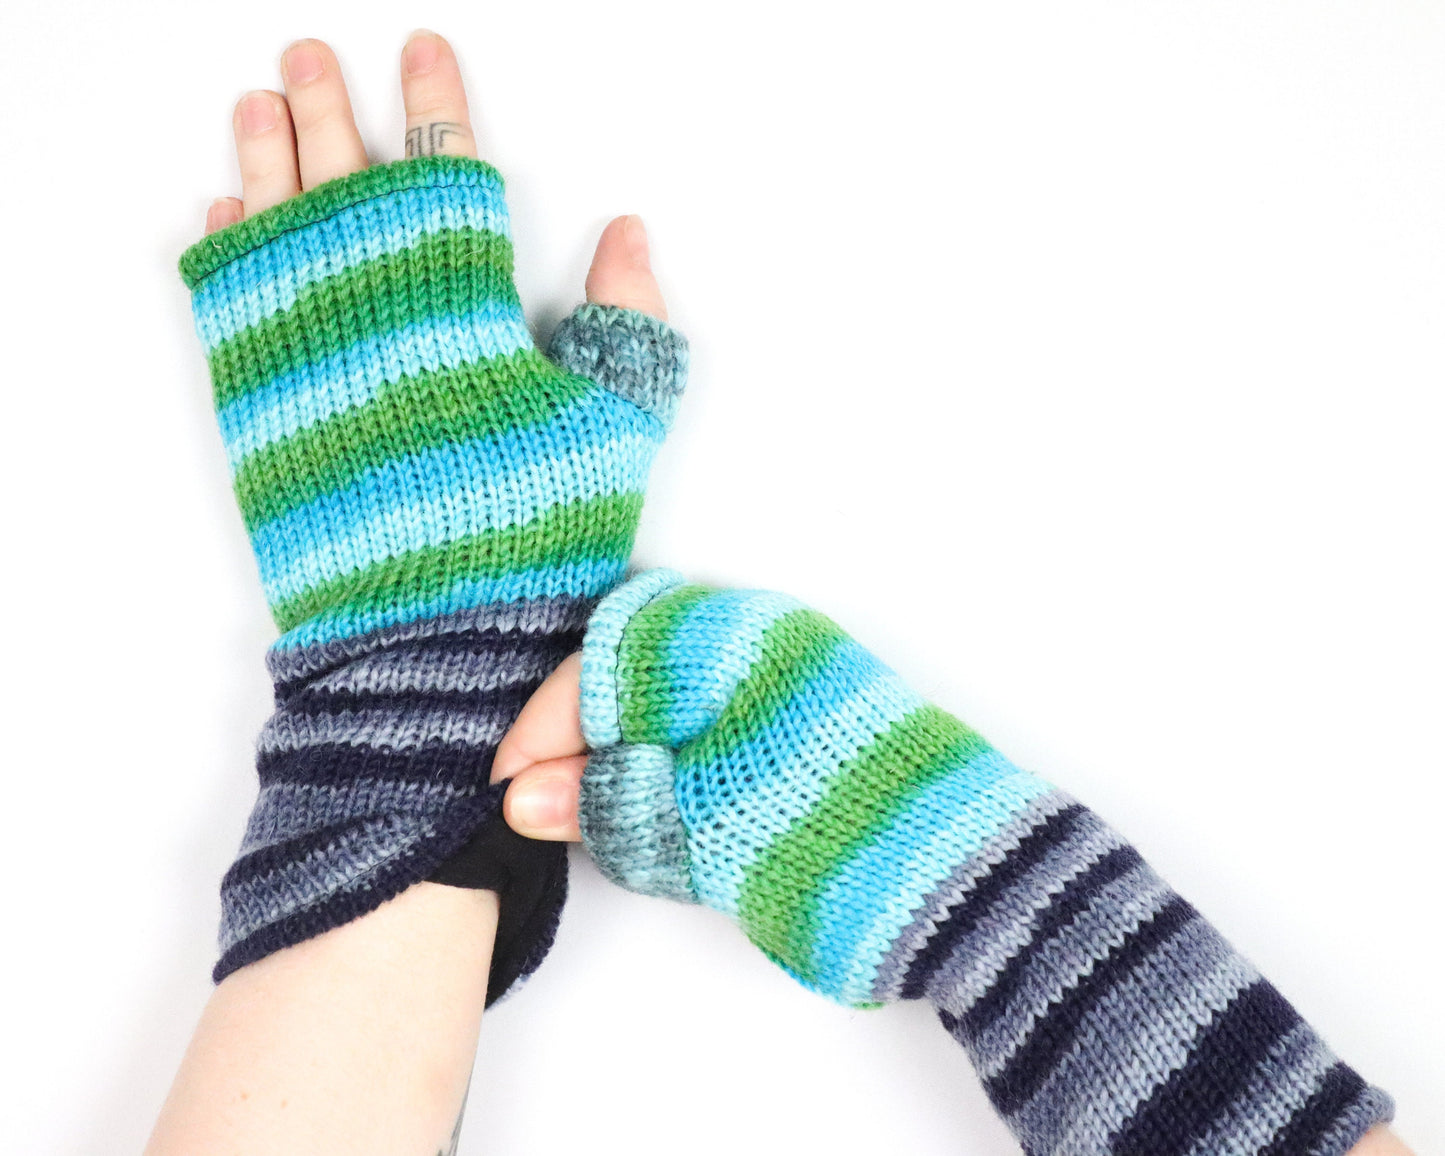 Fleece Lined Knitted Wrist Warmers - Blue and Green Striped